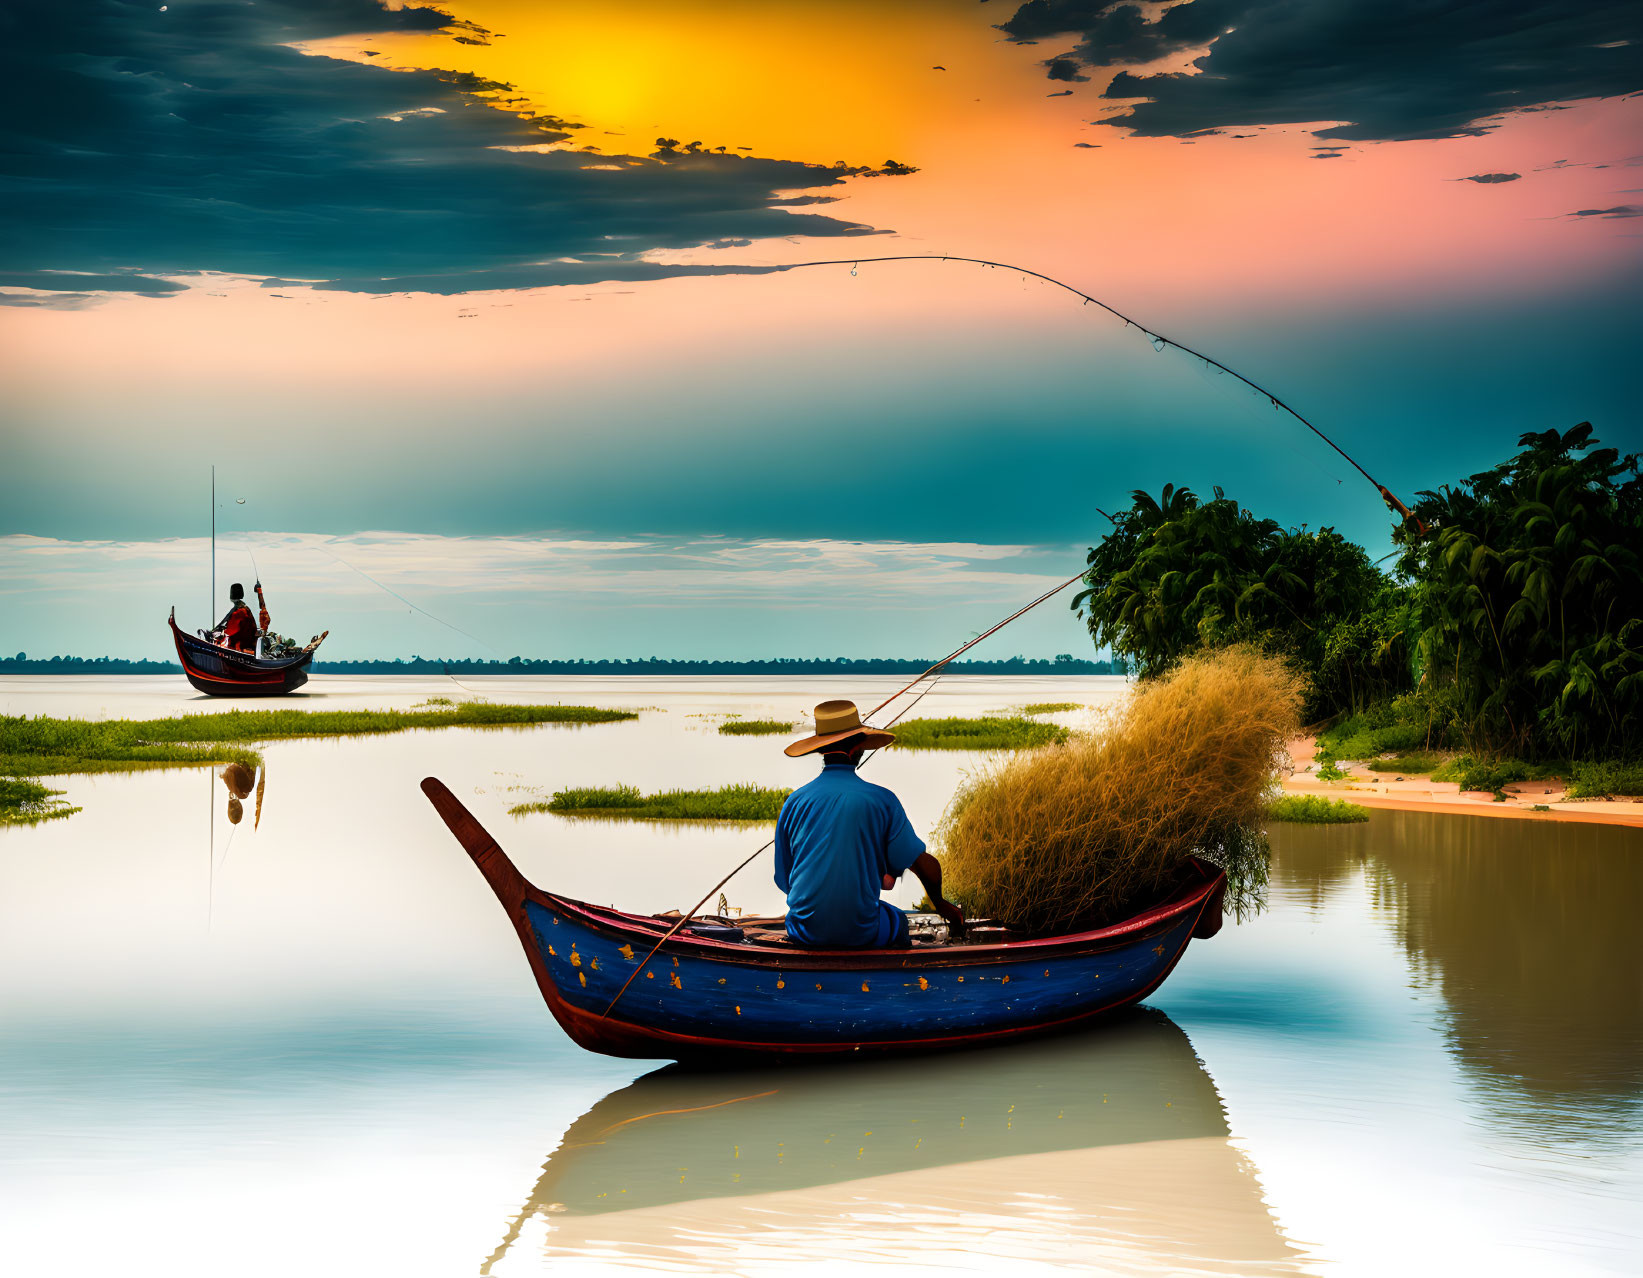 Person in straw hat casting net from blue boat on calm river at sunset